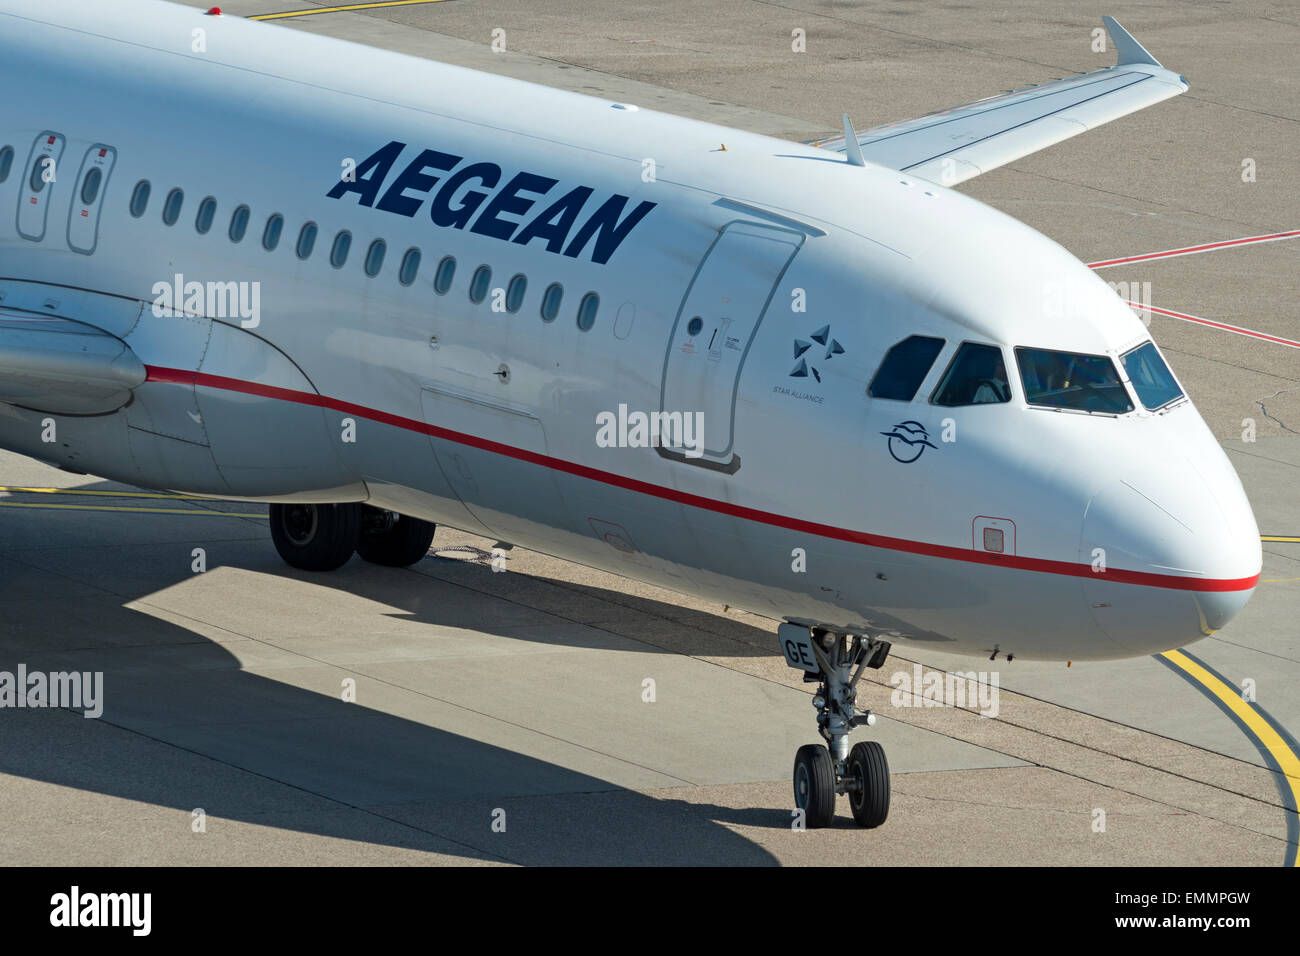 Aegean Airlines Airbus A320 Stock Photo